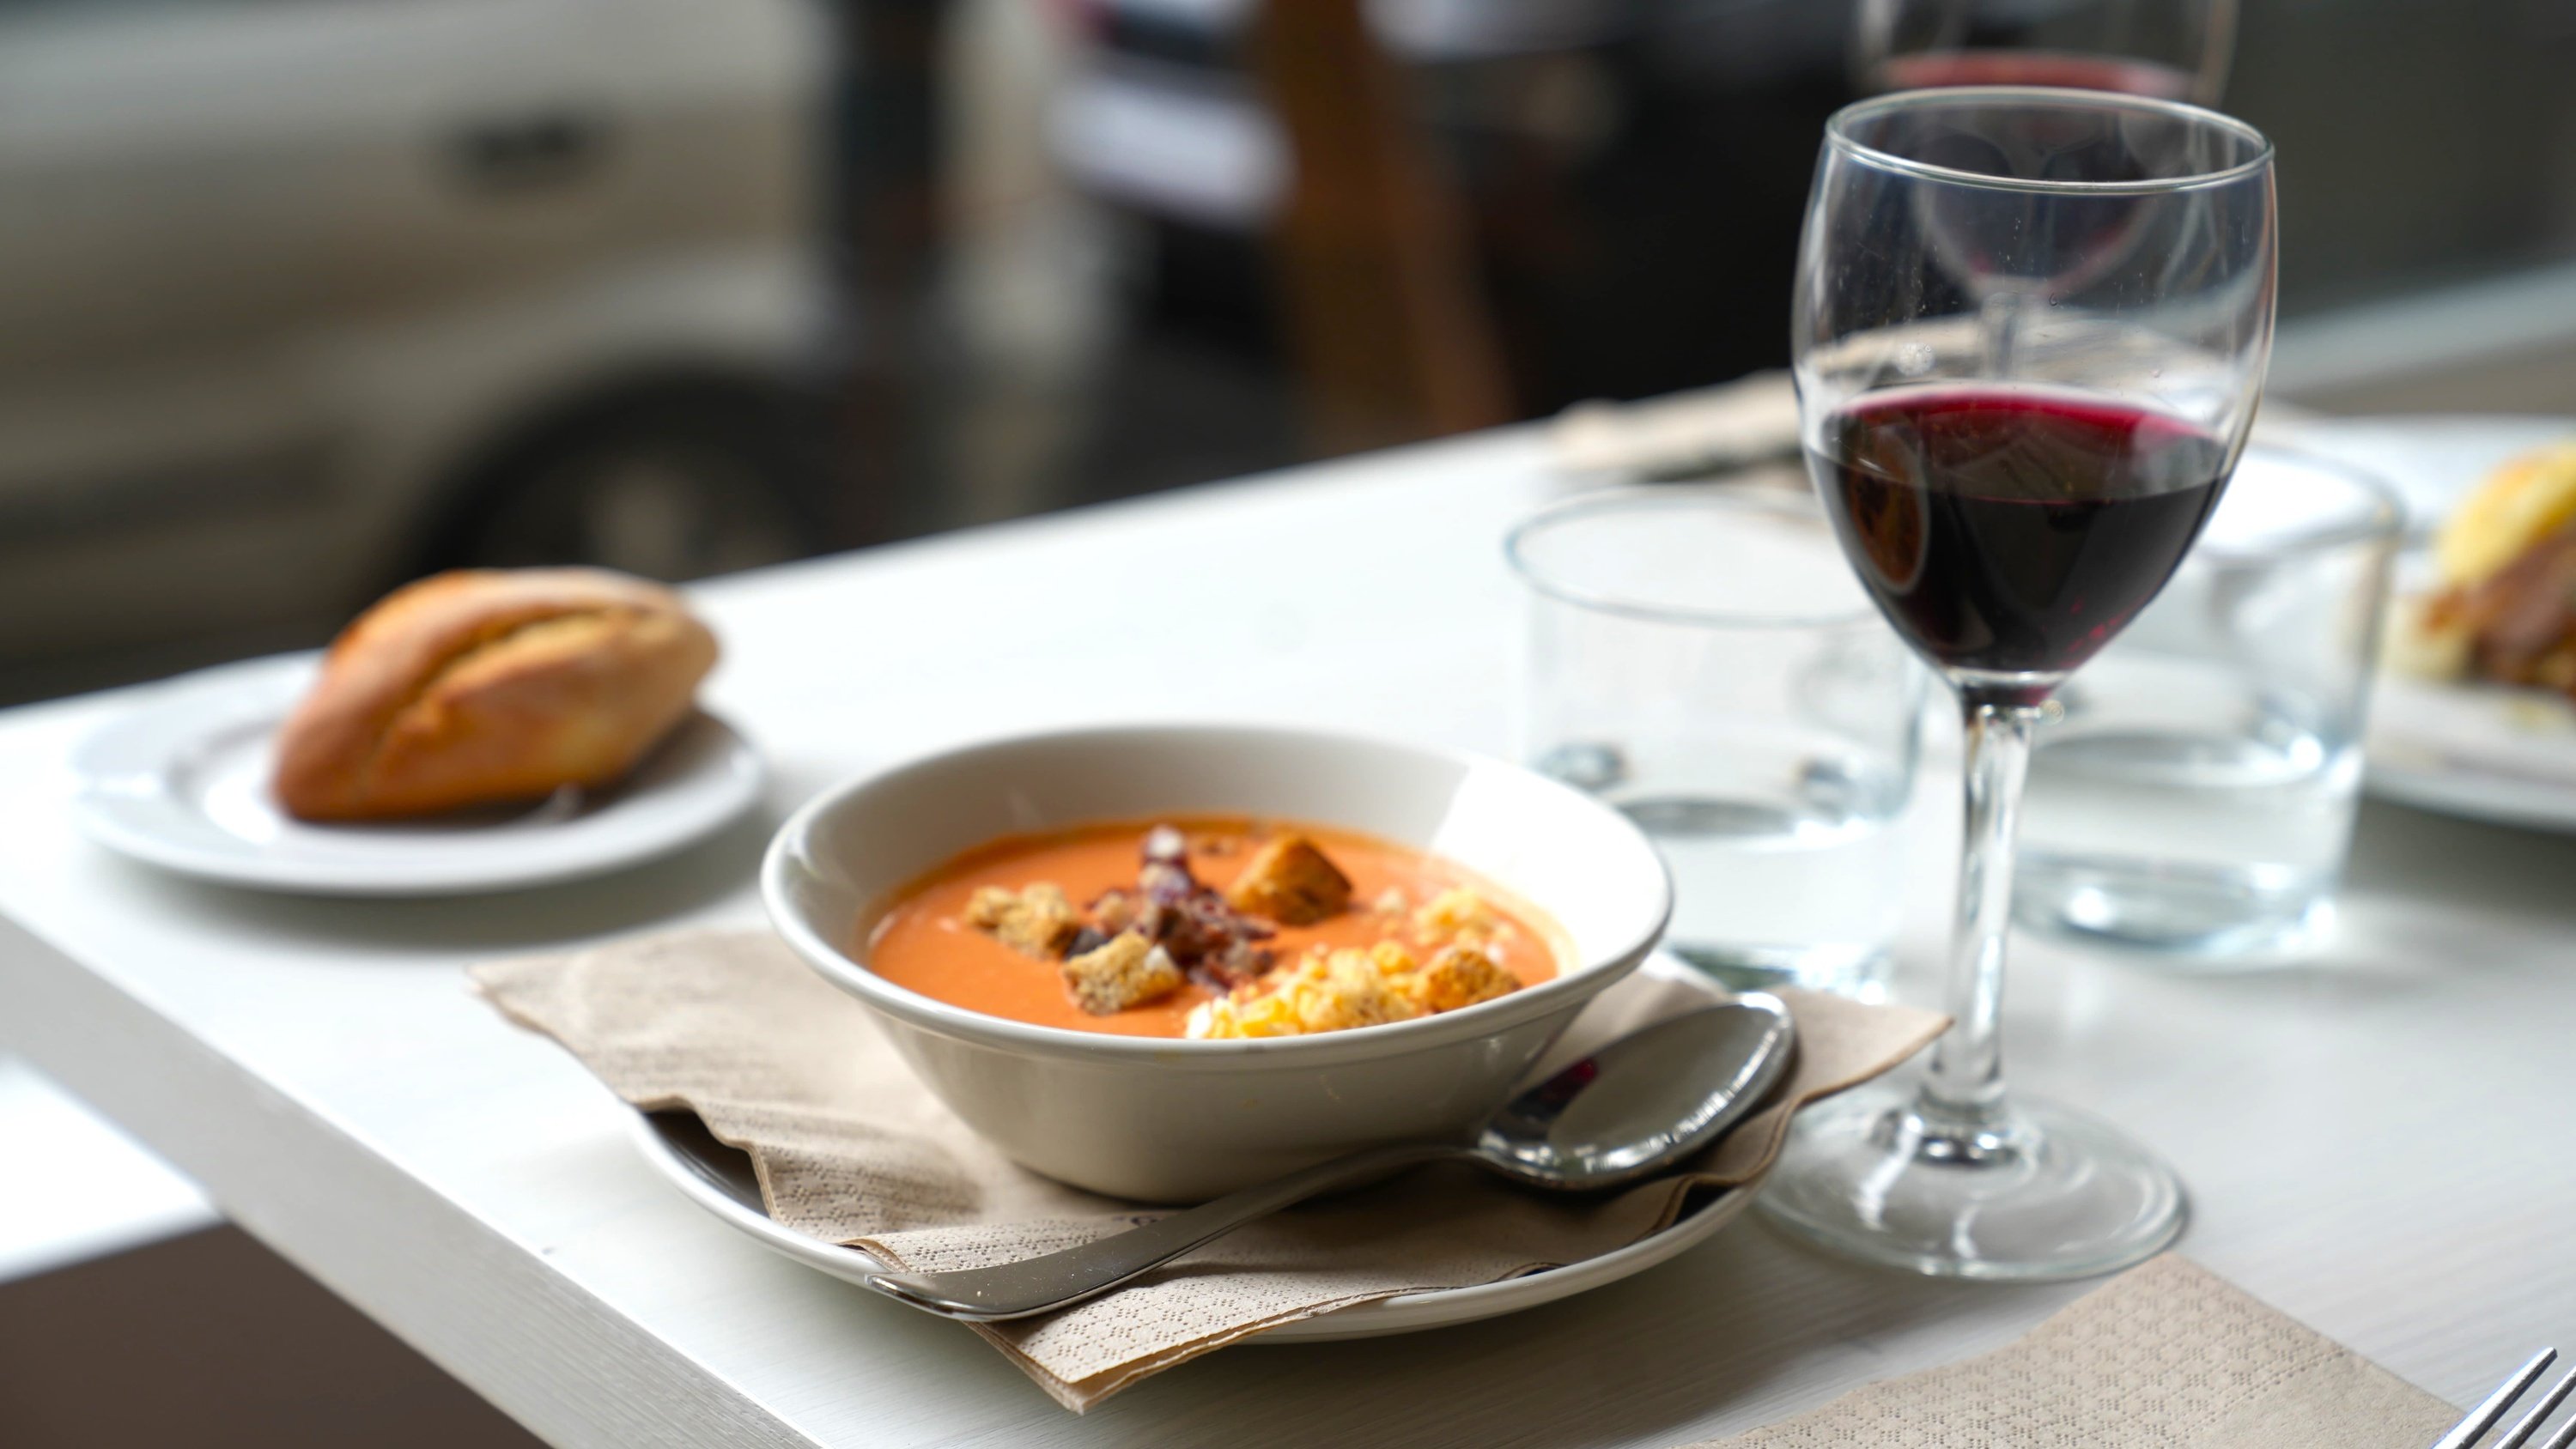 a bowl of soup and a glass of wine on a table